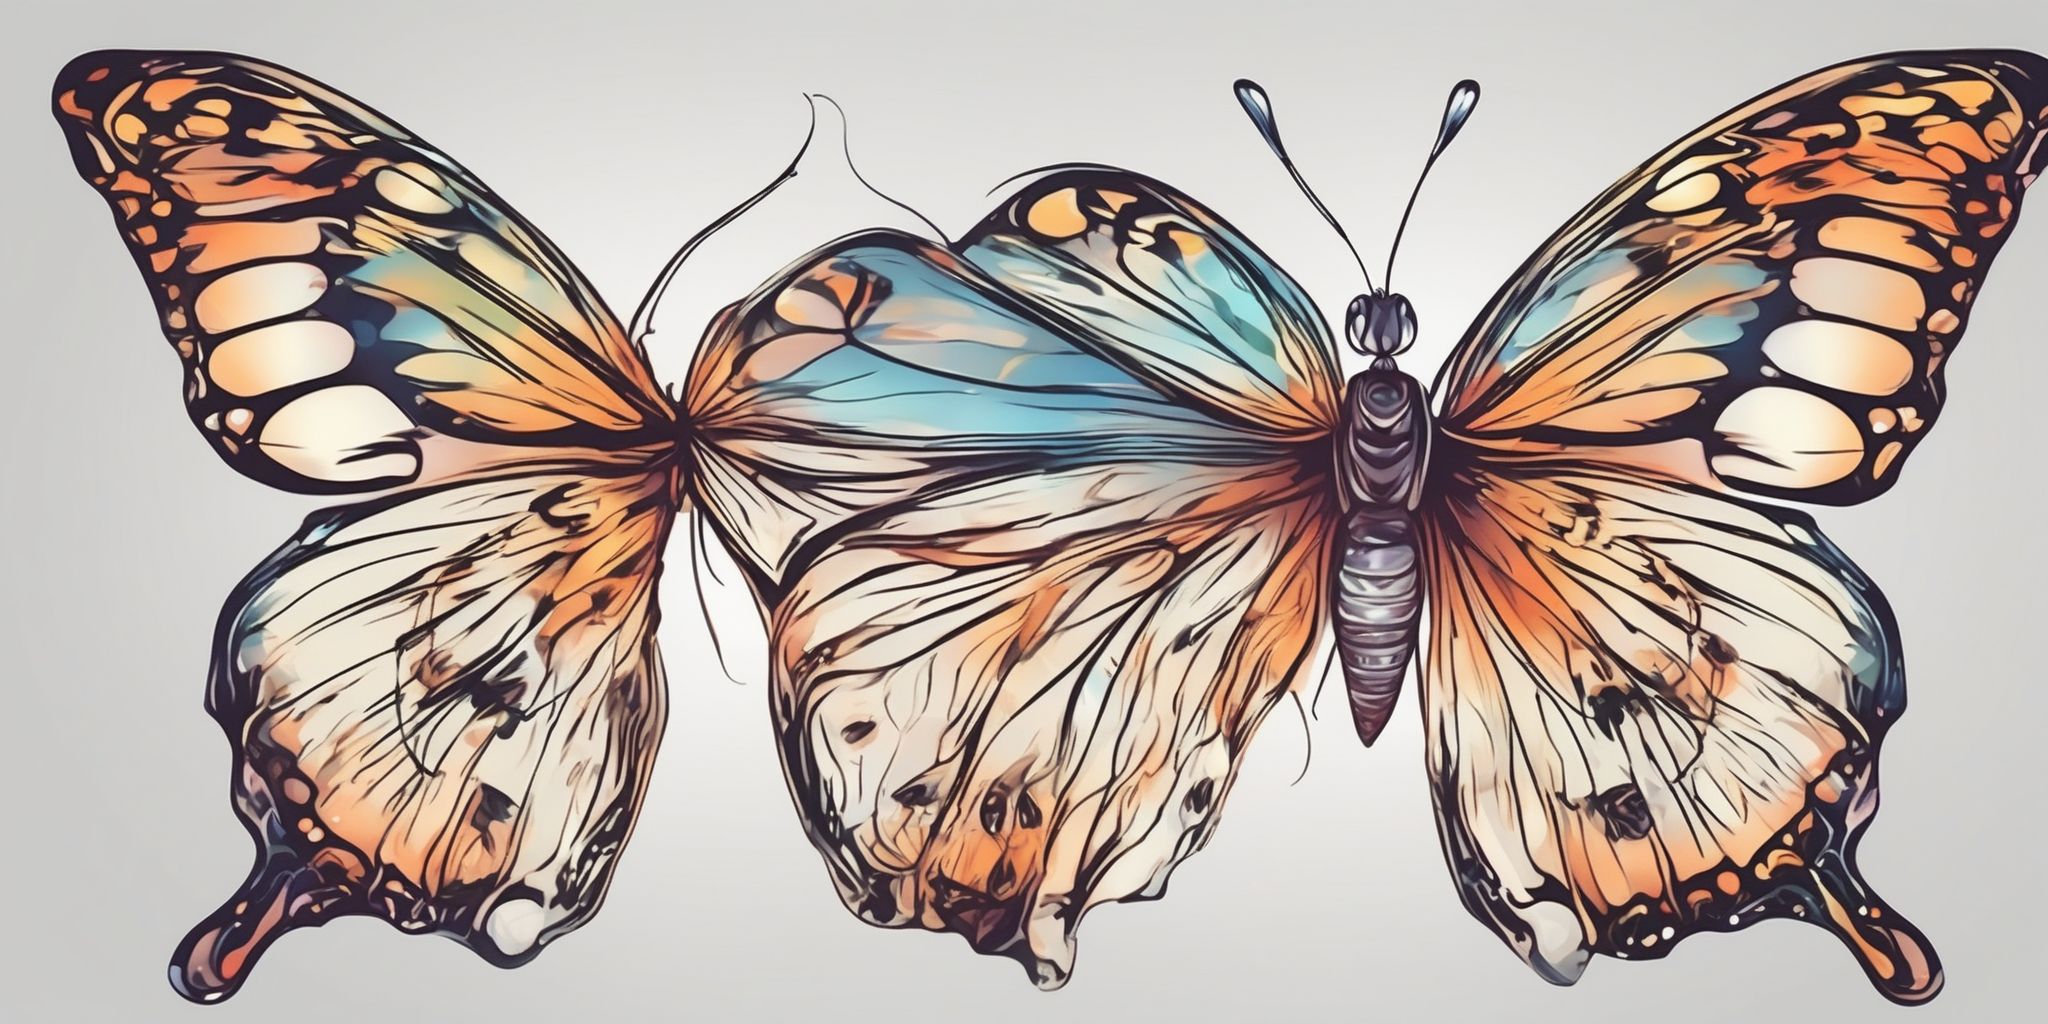 Butterfly in illustration style with gradients and white background